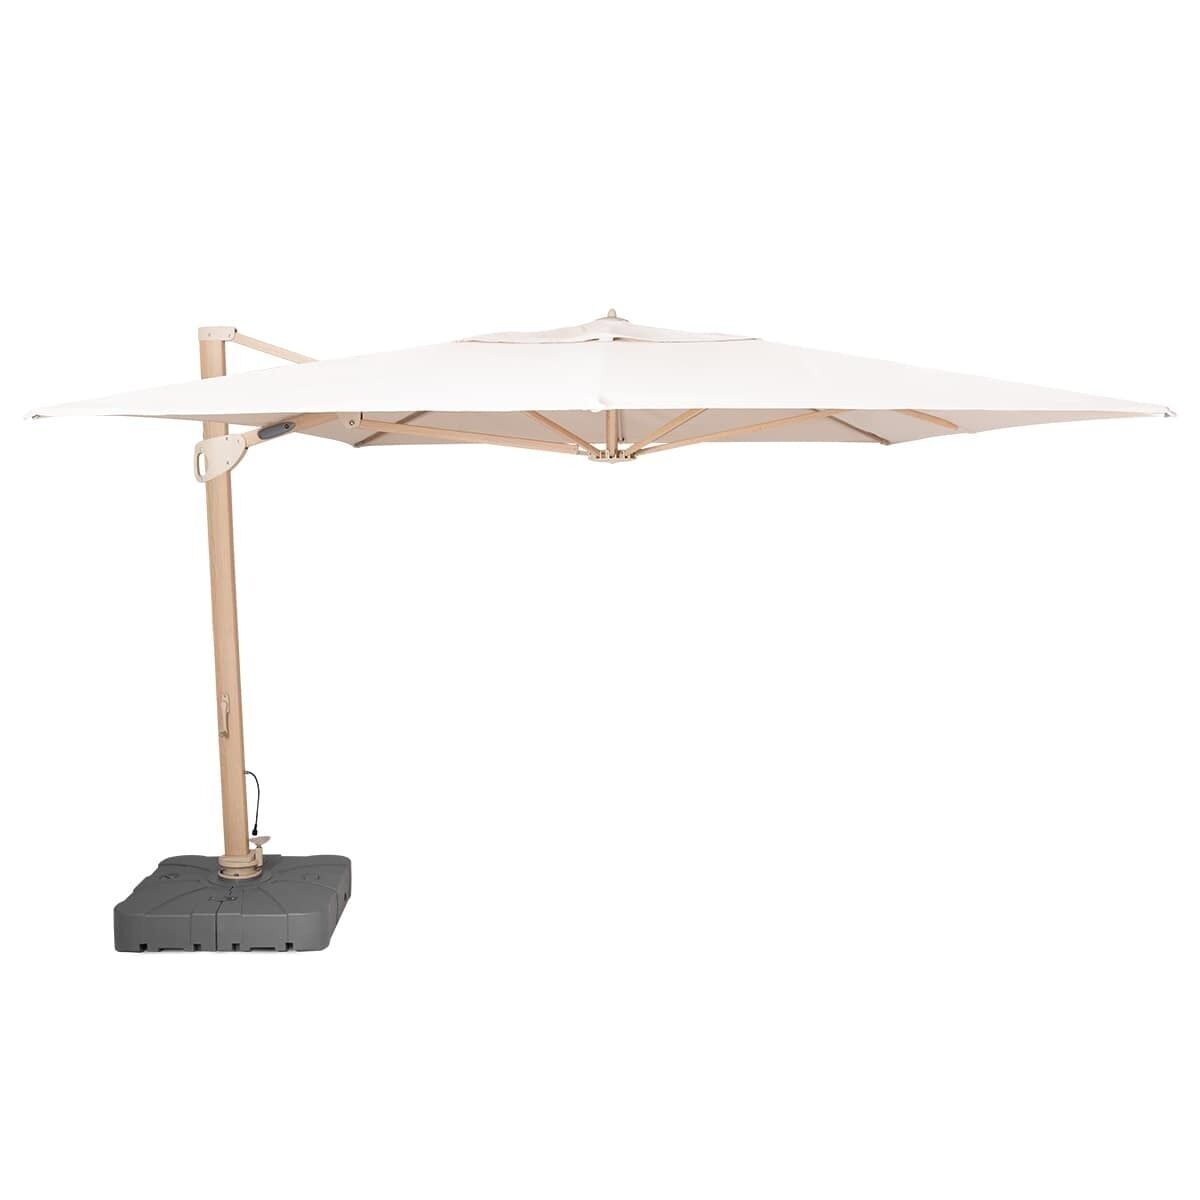 Maze Outdoor Artemis Cantilever Parasol 3m x 4m Rectangular - With LED Lights & Cover - Wood Effect